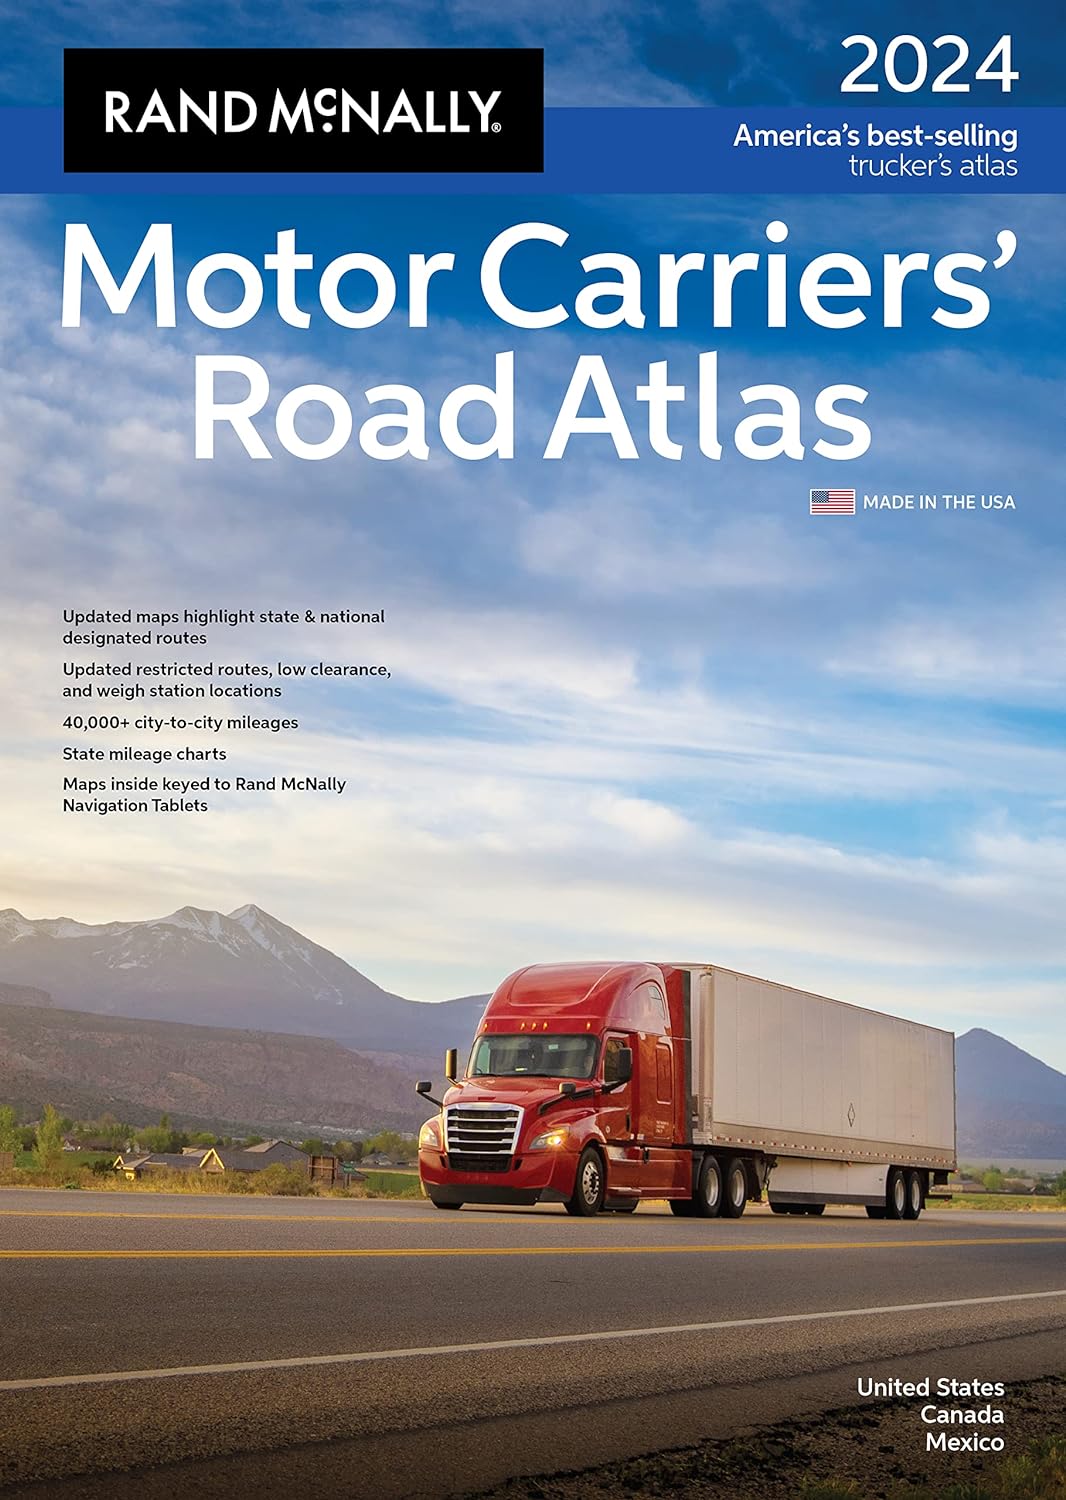 United States/ Canada/ Mexico Motor Carriers' Road Atlas 2024